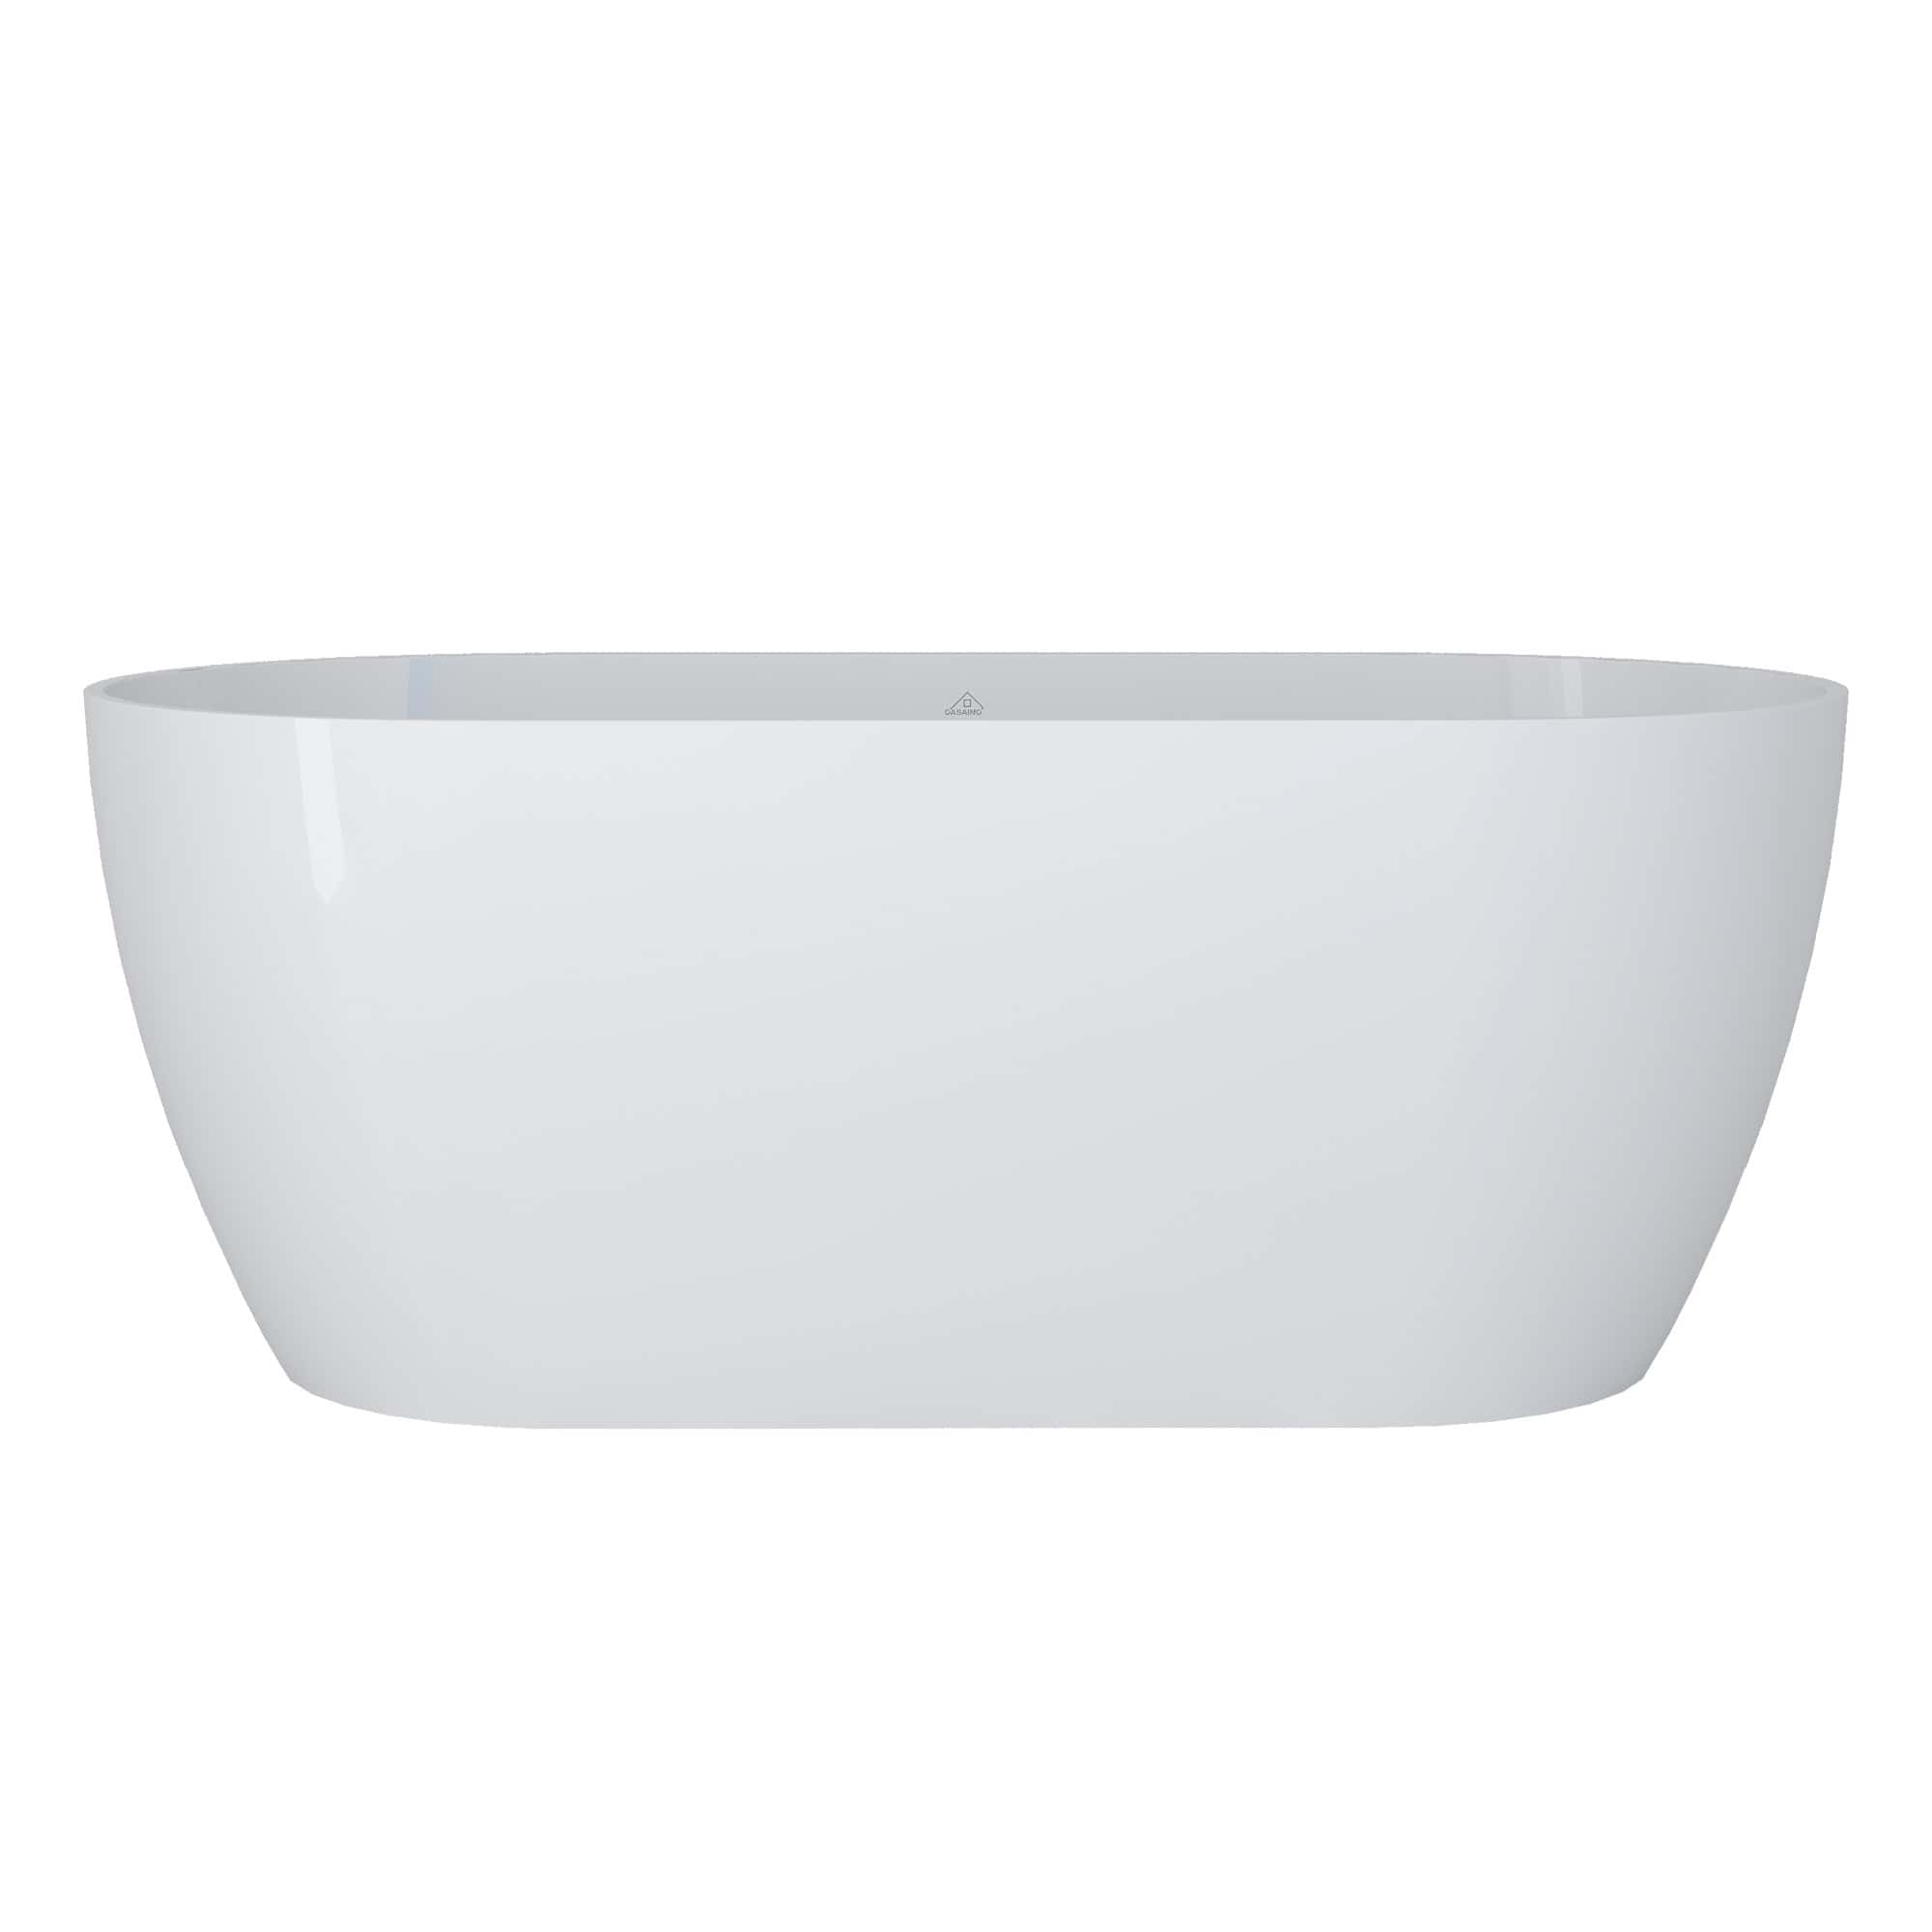 59“ Glossy White Freestanding Stone Resin Tubs, Oval Soaking Bathtub for Comfortable Relaxing Bathtub Experience, Glossy Optional For New Bathroom